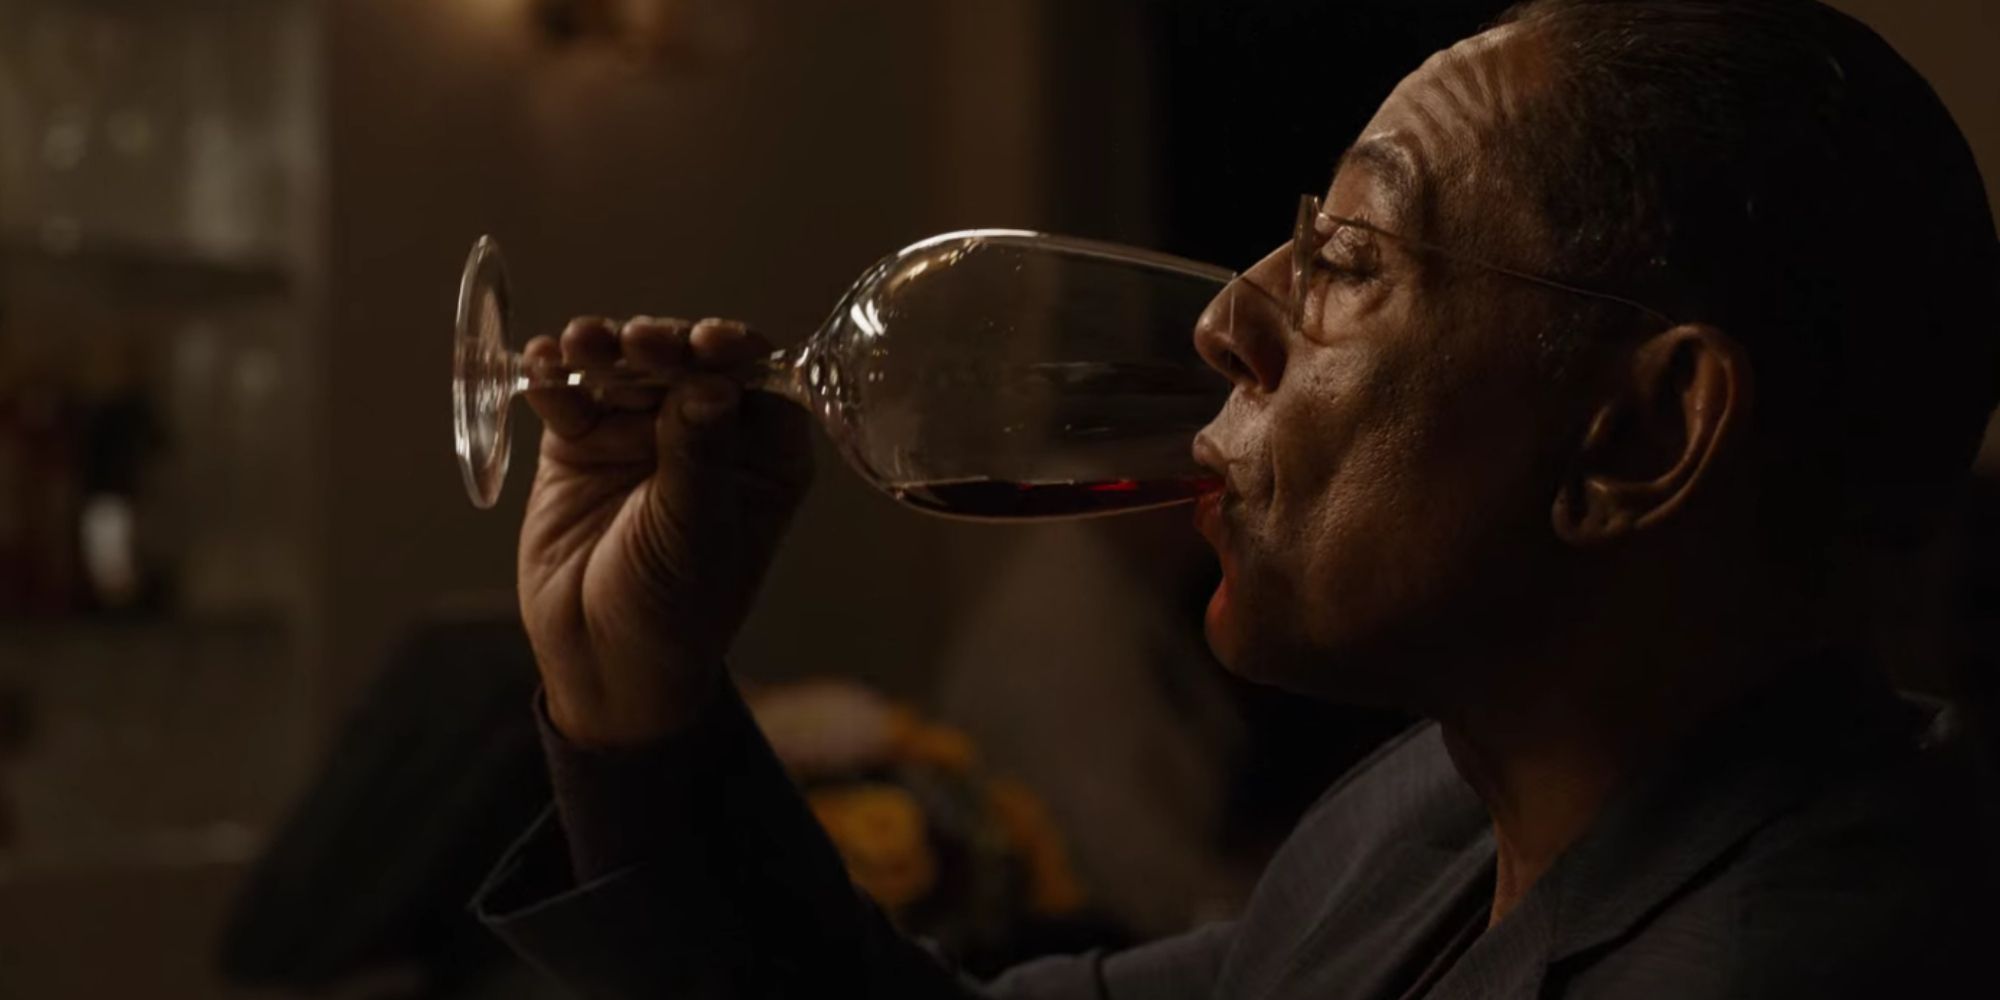 Gustavo Fring sipping a glass of wine in Better Call Saul